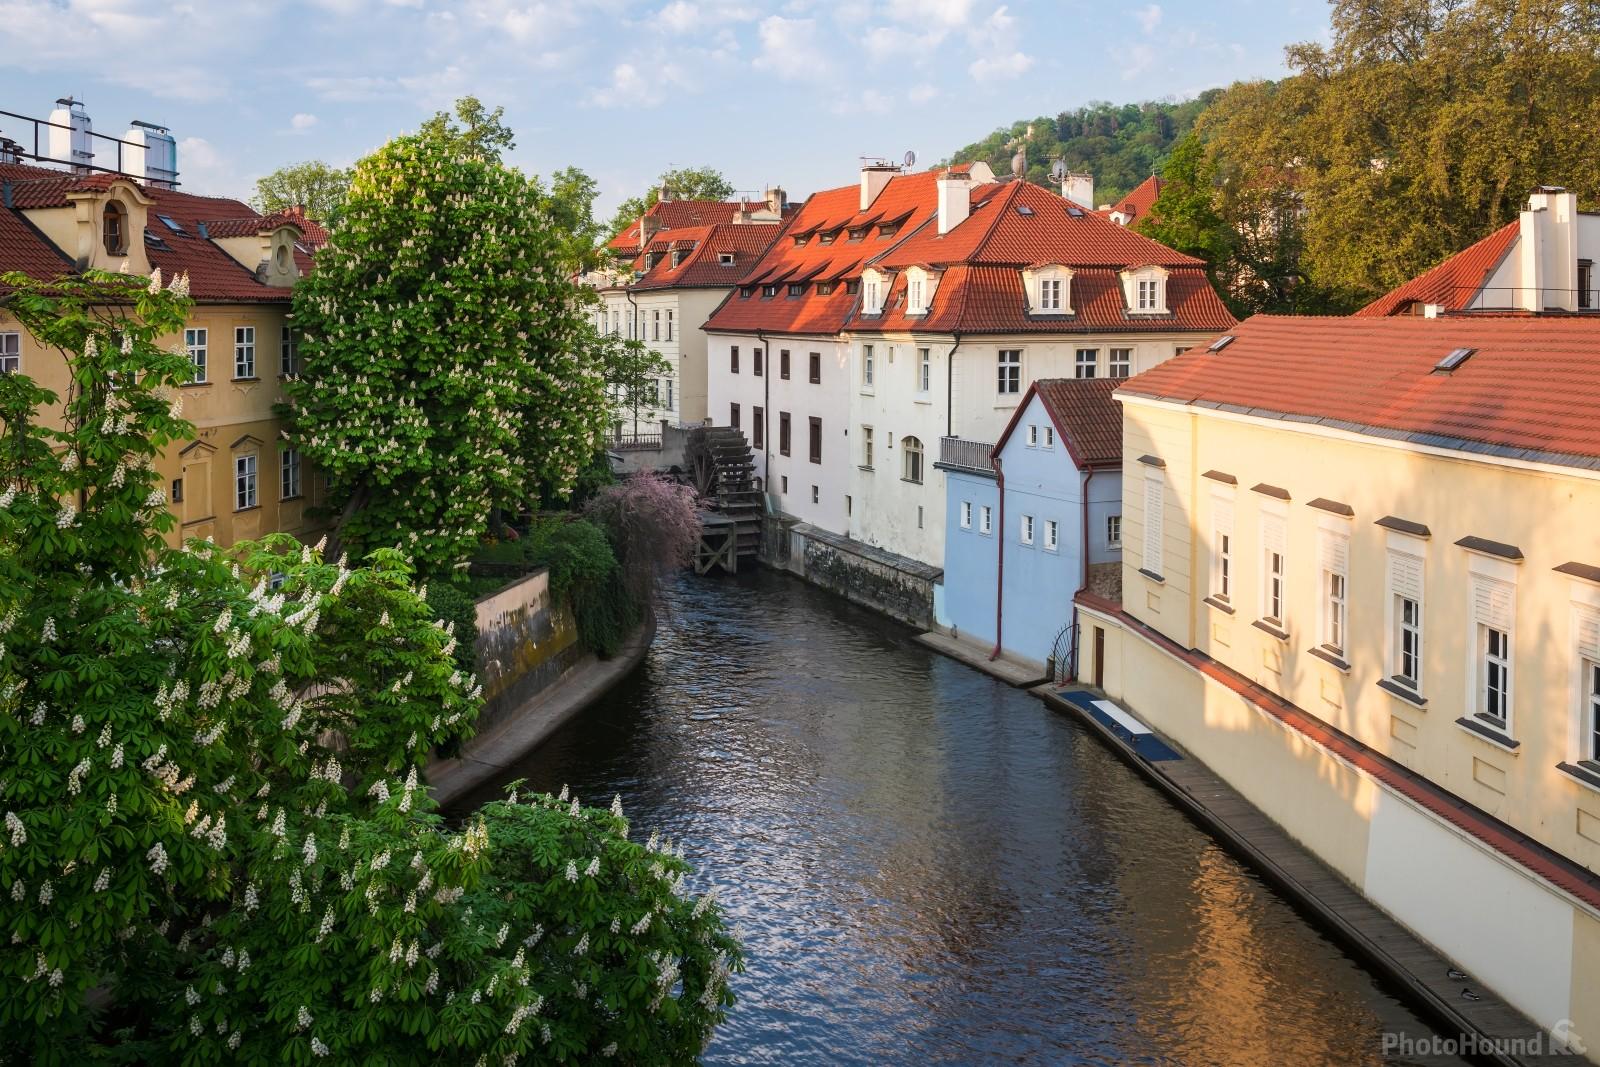 Image of Certovka river from the Charles Bridge by VOJTa Herout